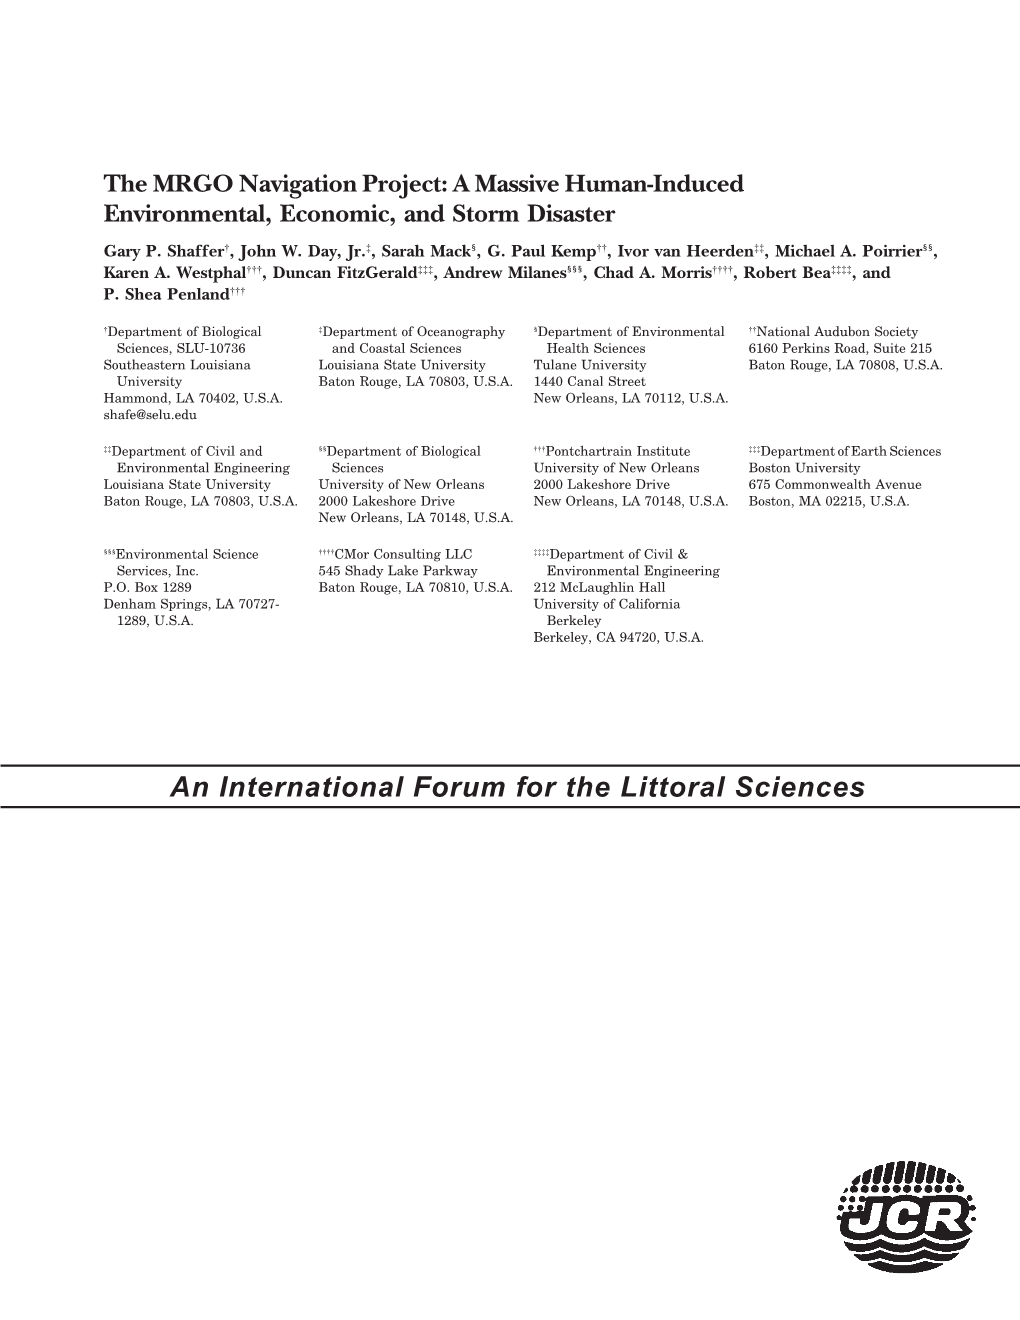 The MRGO Navigation Project: a Massive Human-Induced Environmental, Economic, and Storm Disaster Gary P